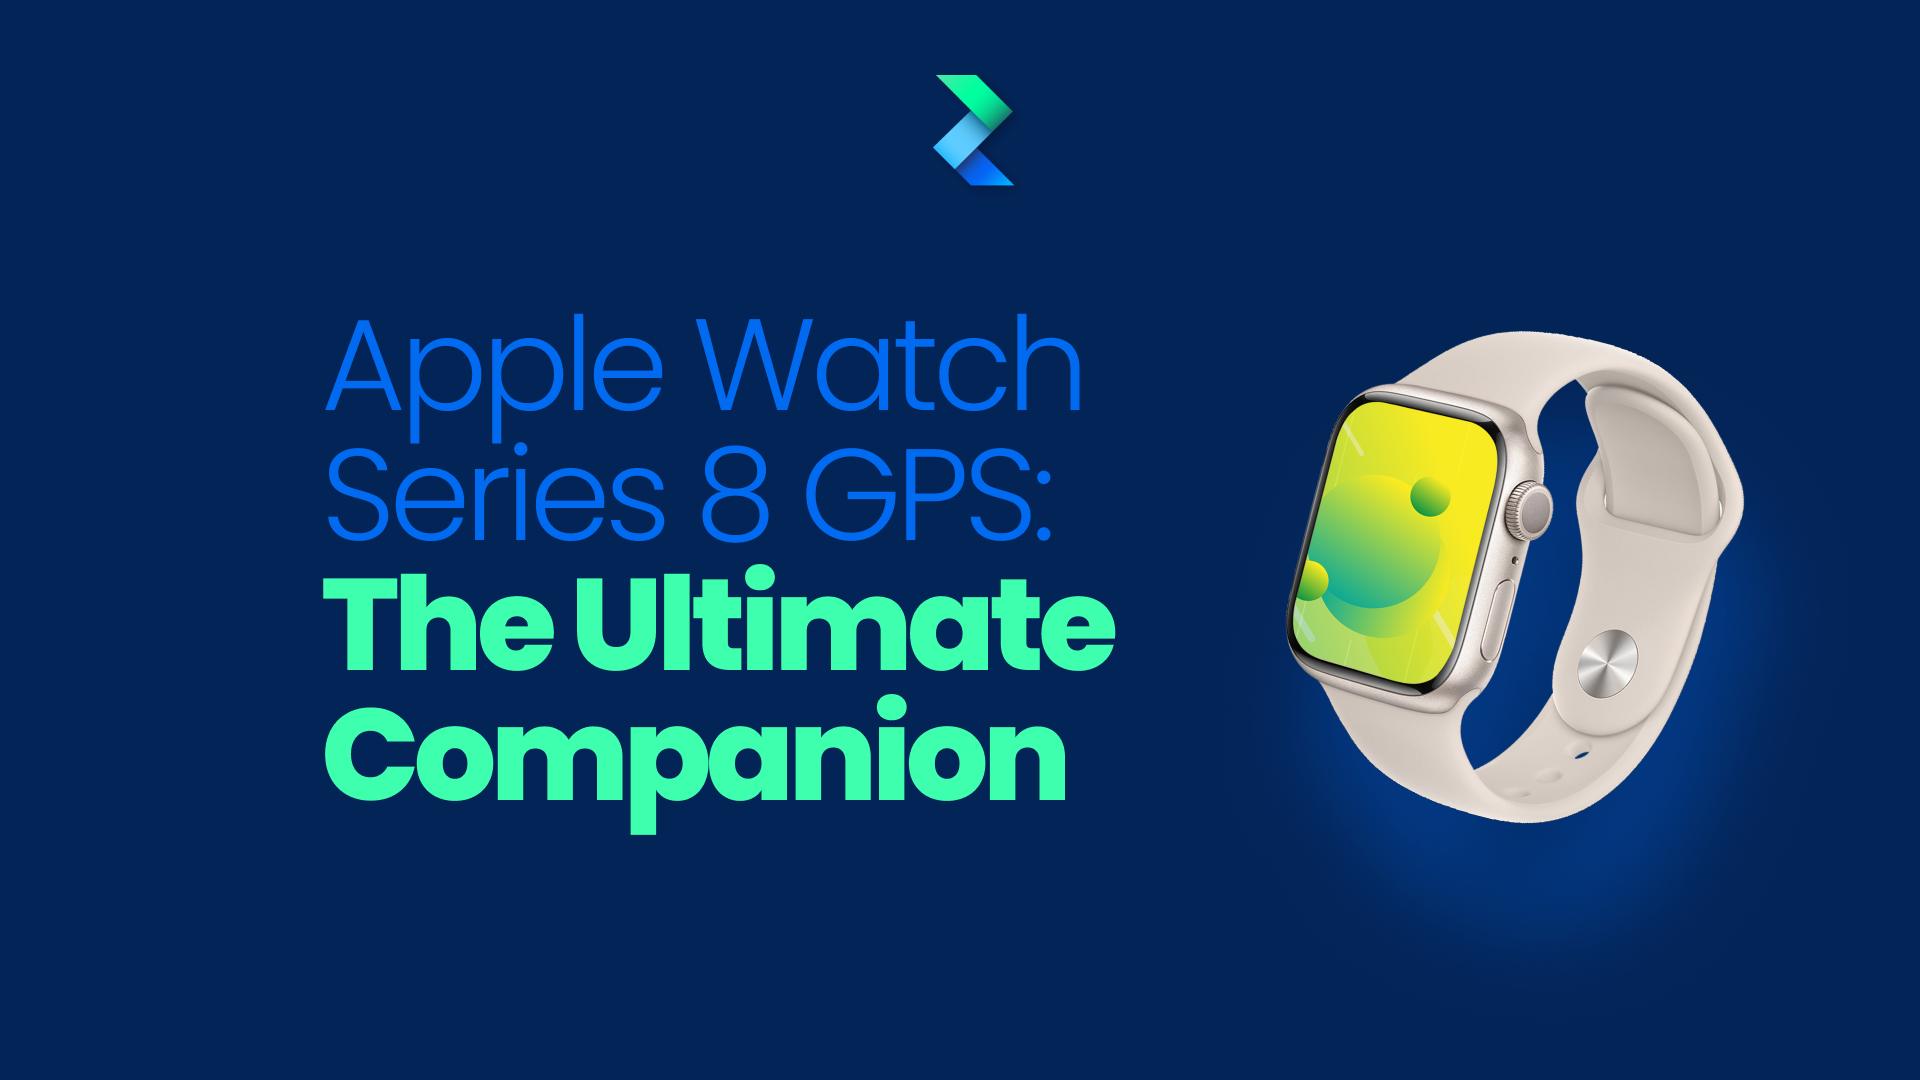 Apple Watch Series 8 GPS: The Ultimate Companion for Your Active Lifestyle